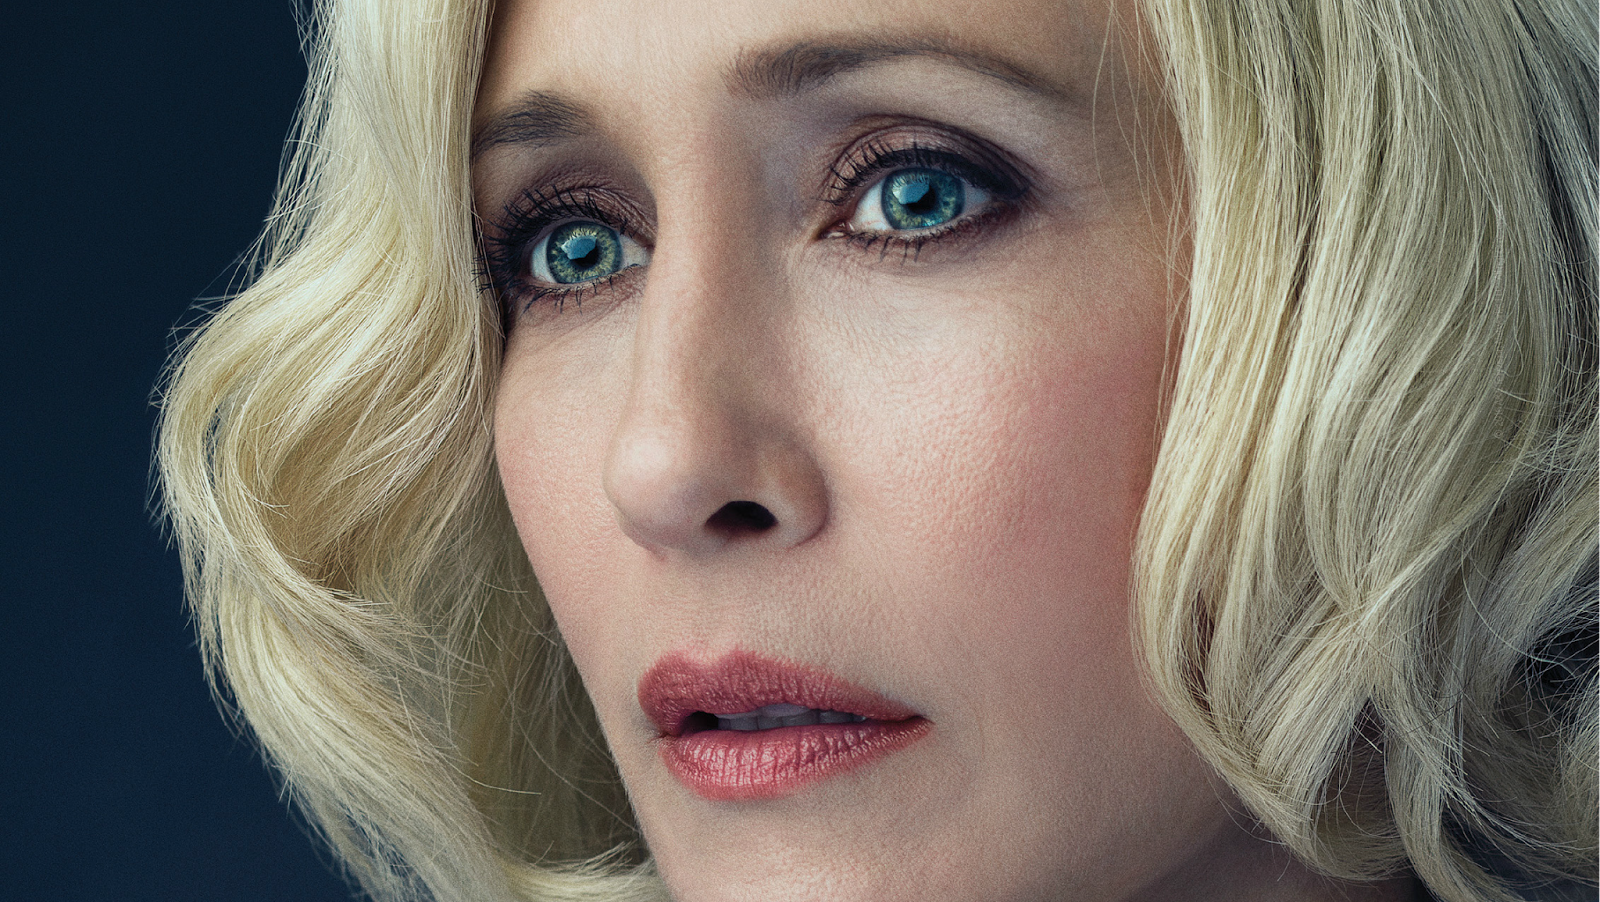 Vera Farmiga was snubbed by the 2017 Emmy nominations for her role as Norma Bates on Bates Motel